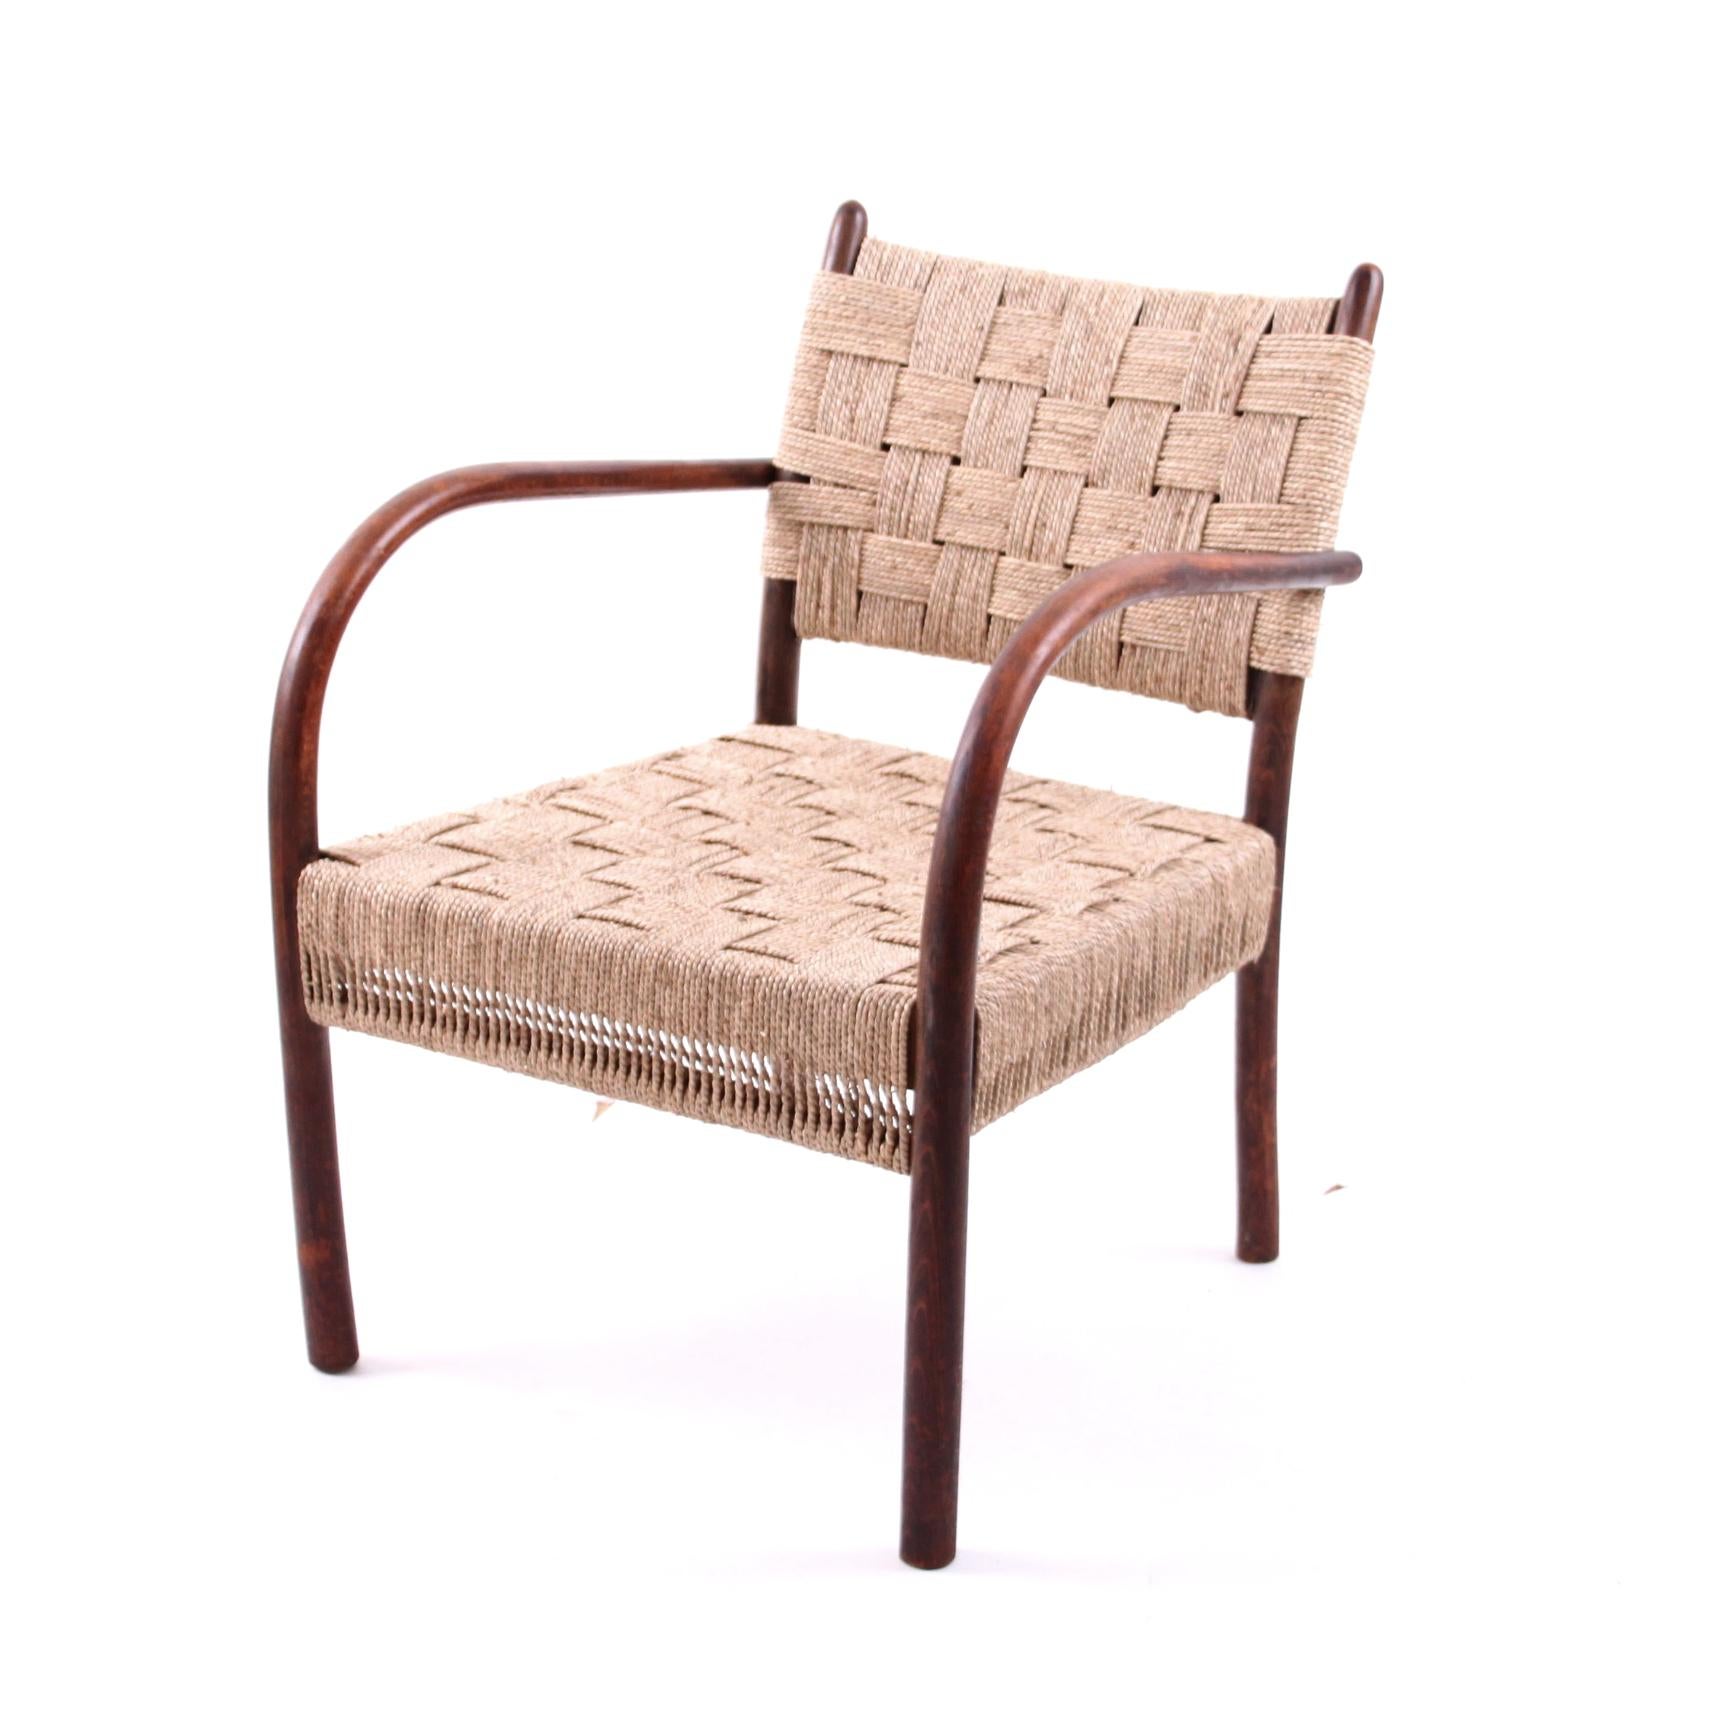 K. Scröder Armchair, Stained Beech and Woven Seagrass, Denmark, 1930s 3